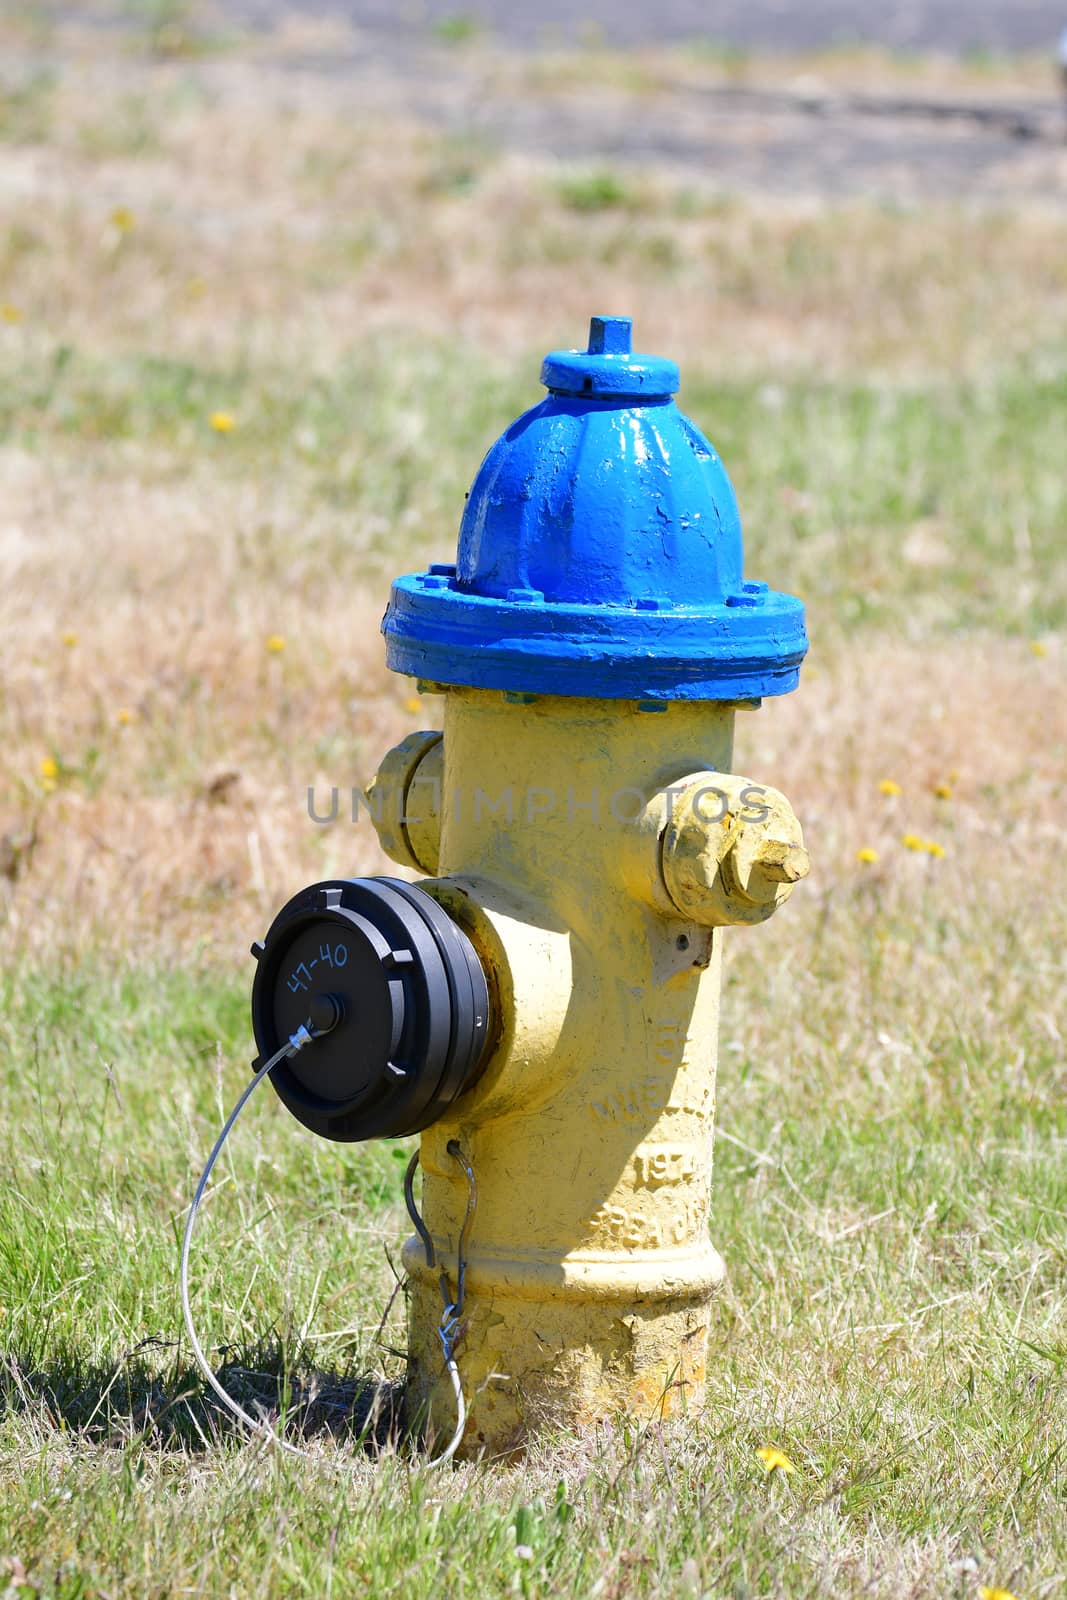 Fire hydrant standing on lawn in bright sunshine